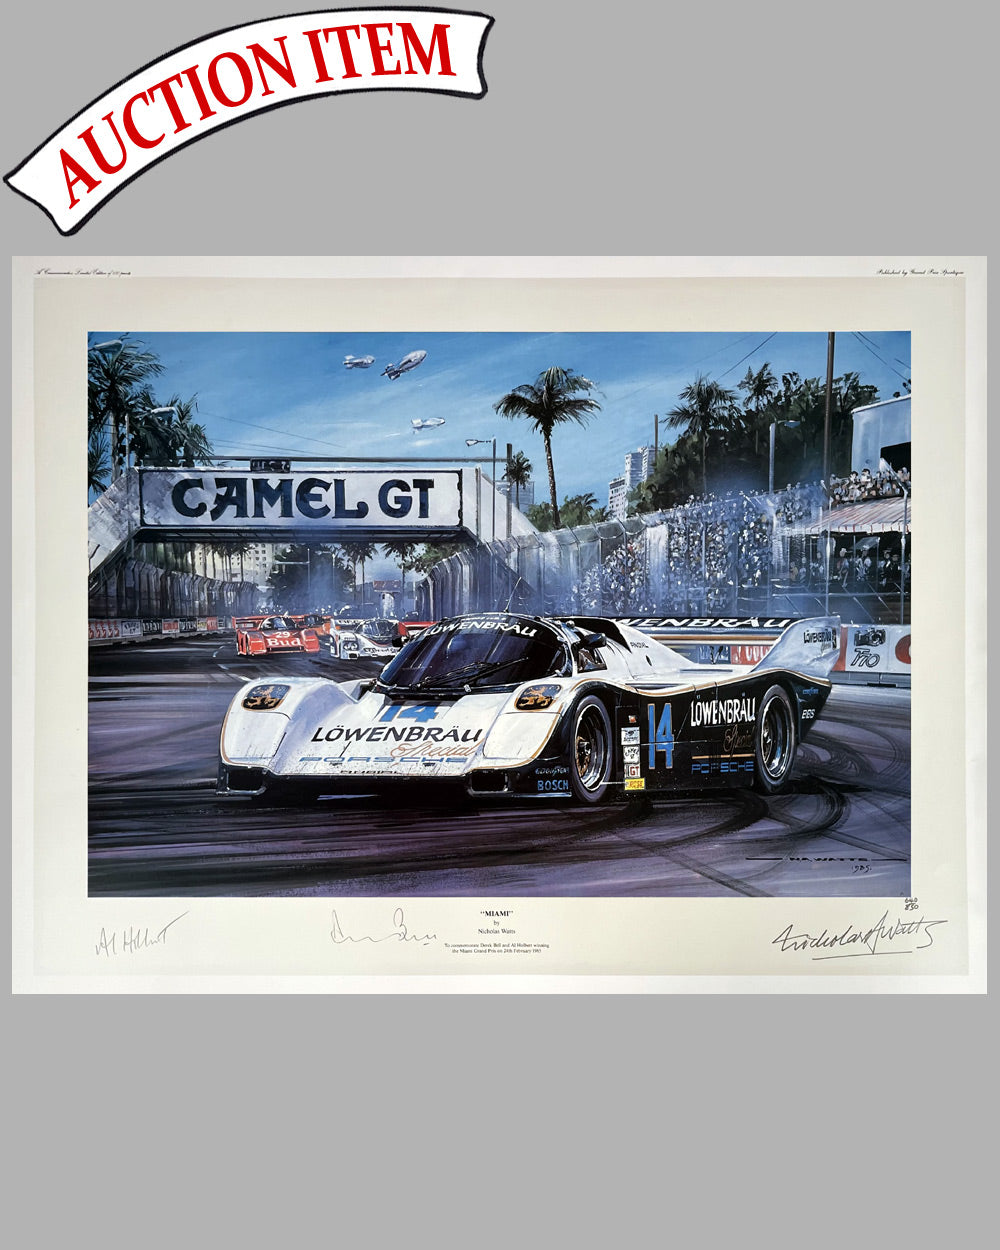 Miami print by Nicholas Watts, hand autographed by Holbert and Bell